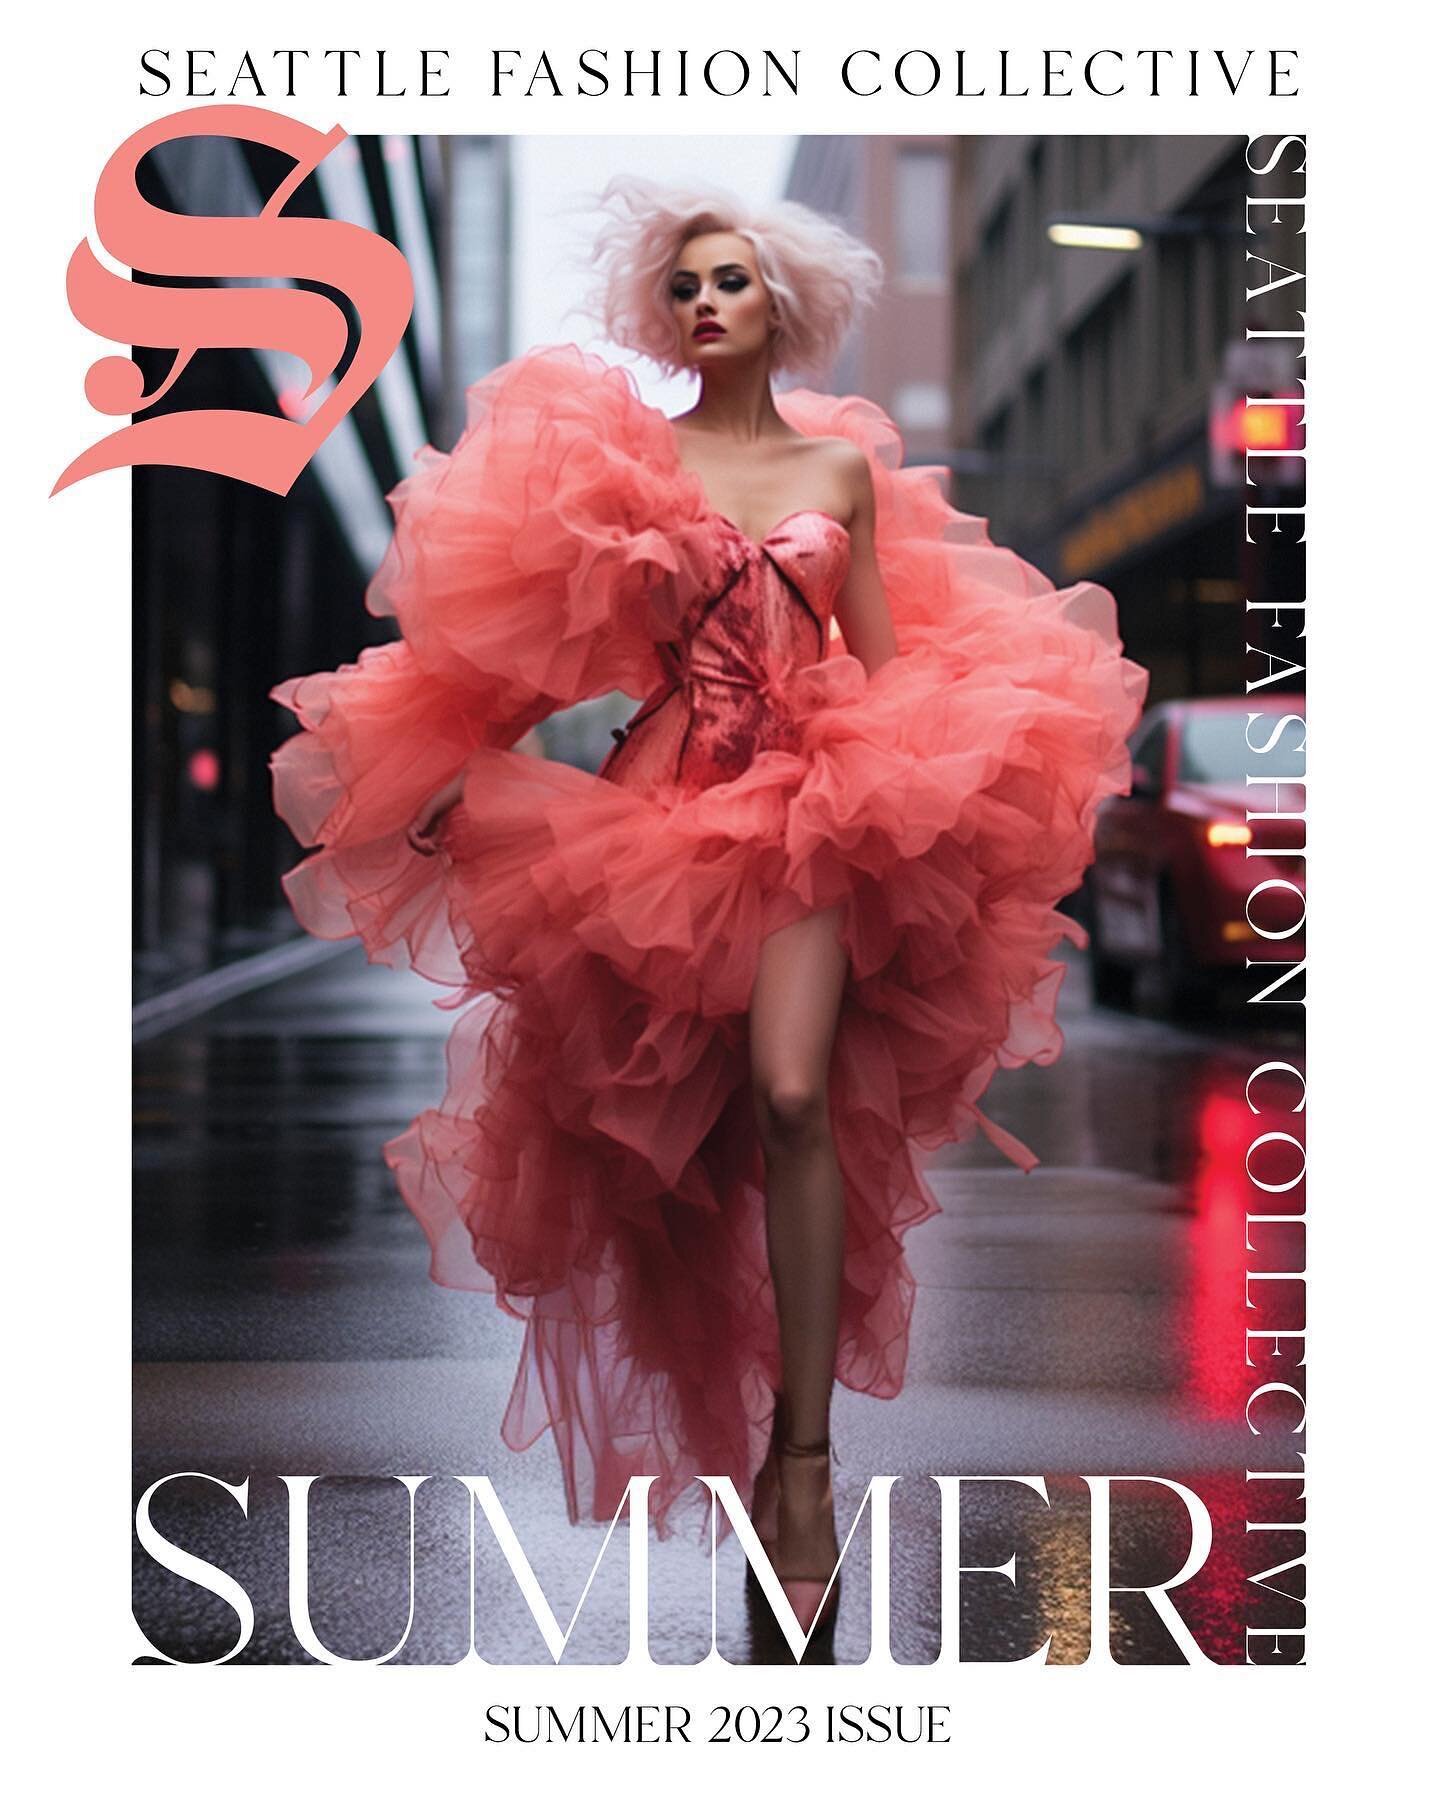 Have you ever imagined what a Luly Yang SS24 haute couture collection would look like?  Or have you ever imagined a fashion editorial with Lisa Marie Couture photographed in the style of Richard Avedon?  Well, there's an app for that.  Several in fac